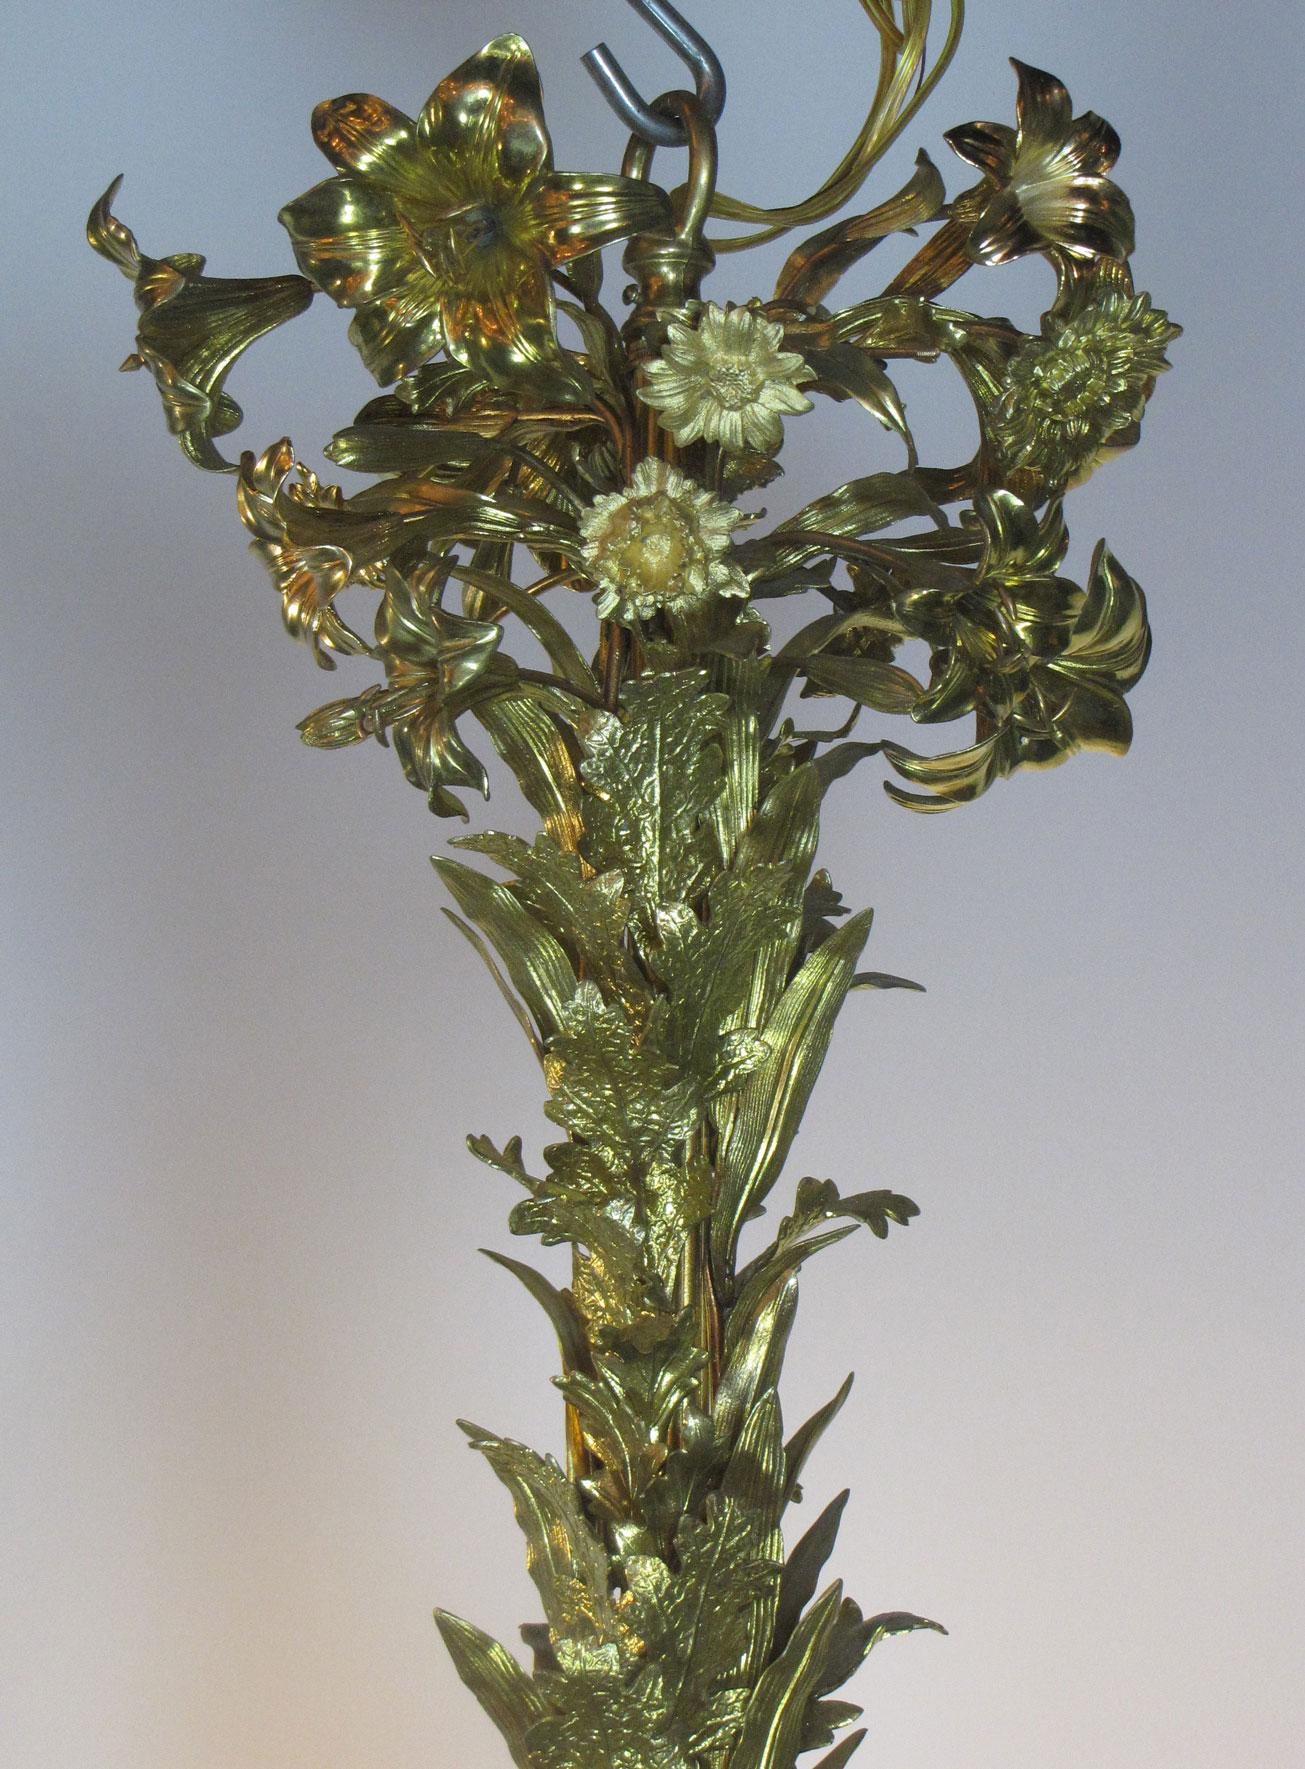 The opulence of the gilded era is celebrated by this chandelier in excess with not only gilded lilies, but chrysanthemums and poppies as well. It was imported from France during the late 19th Century and hung in the mansion of David Sears at 132